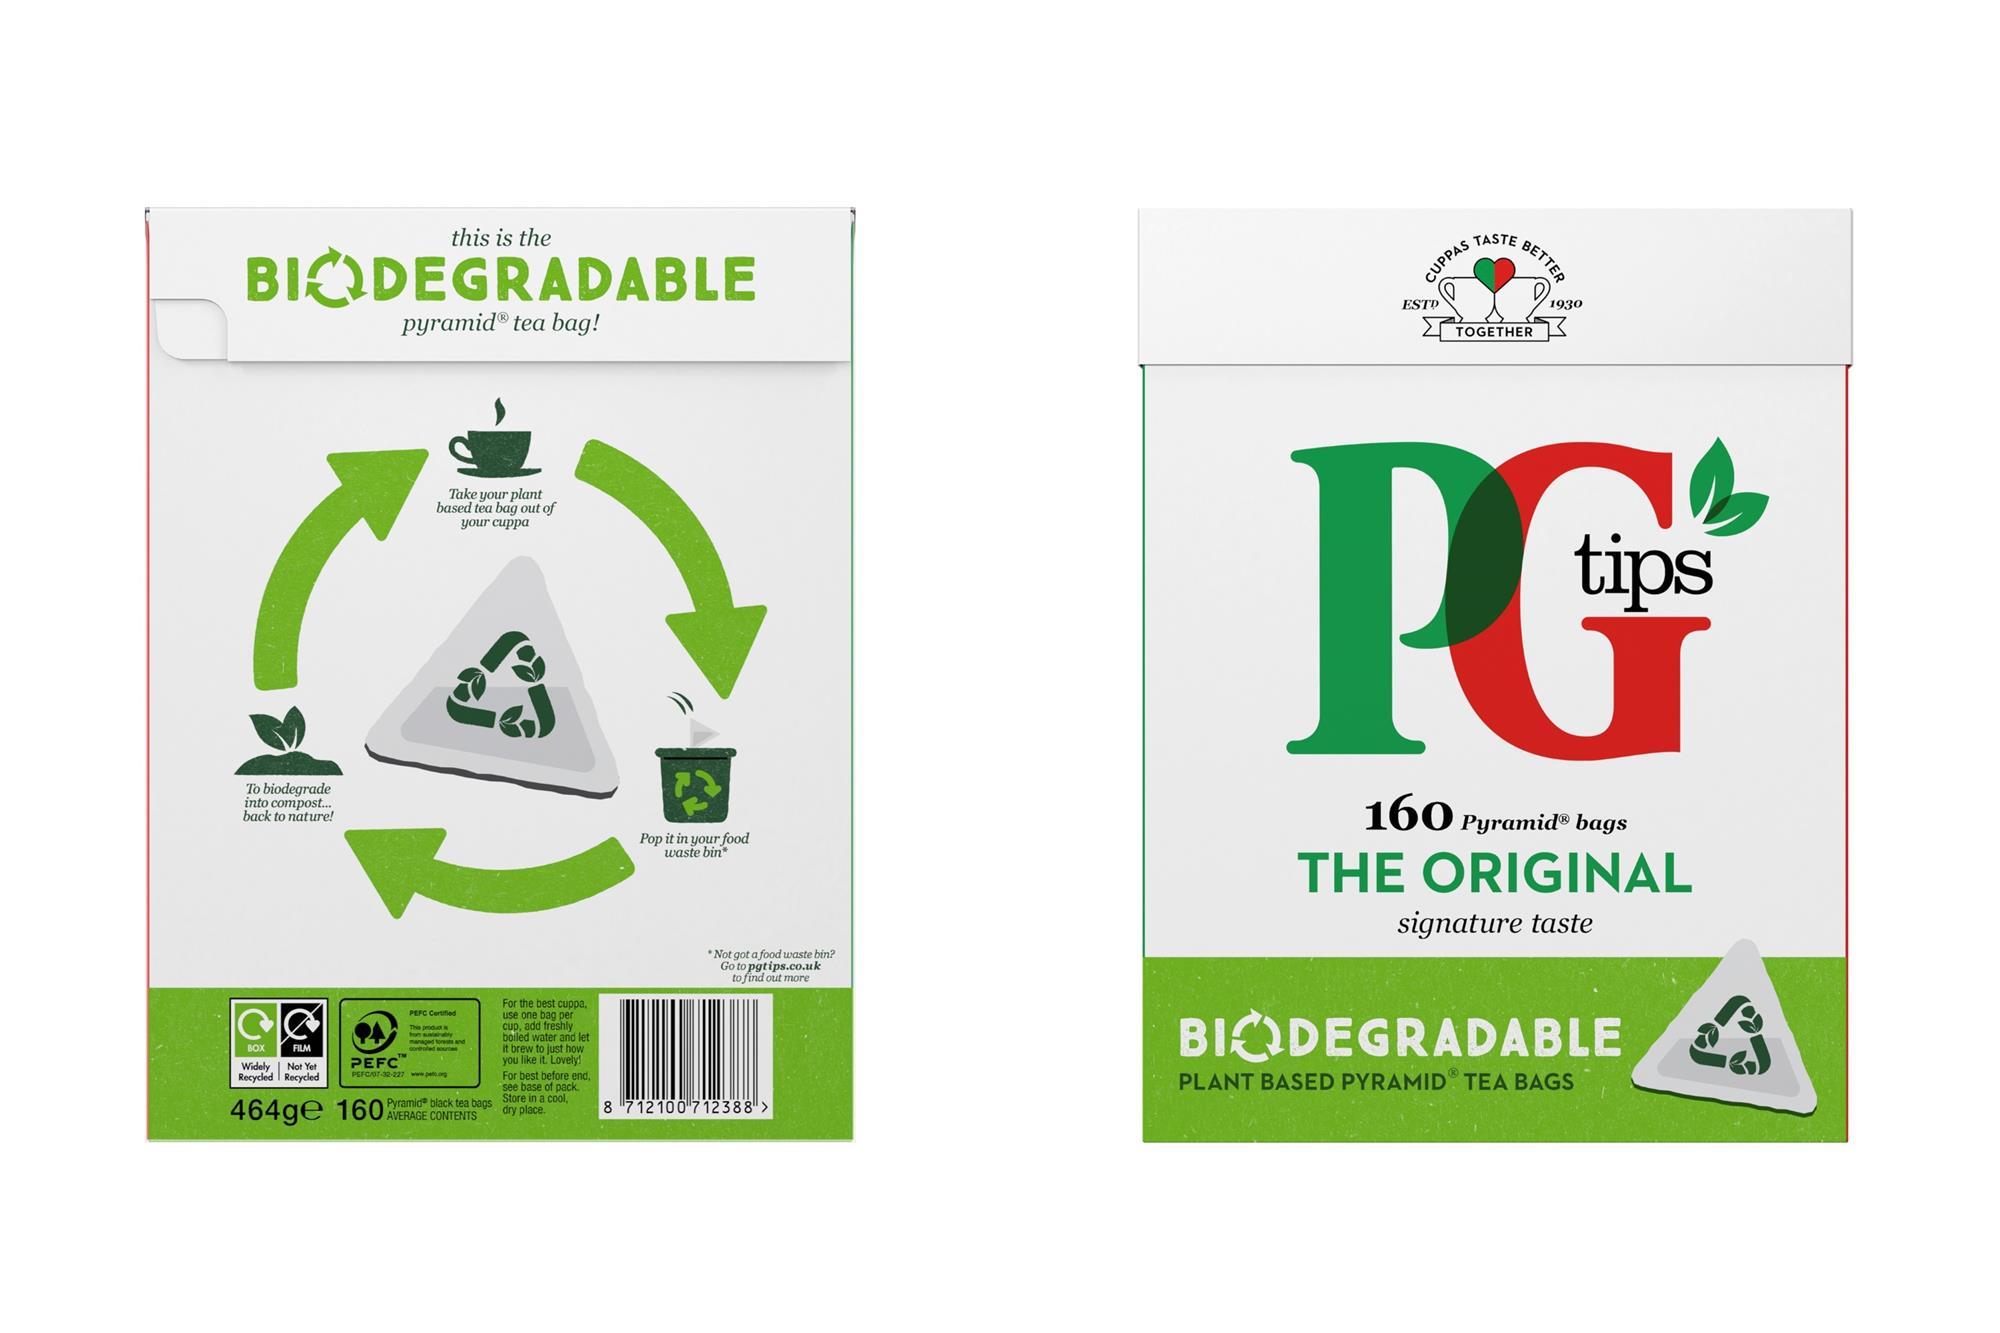 Manufacturer launches first biodegradable tea bag